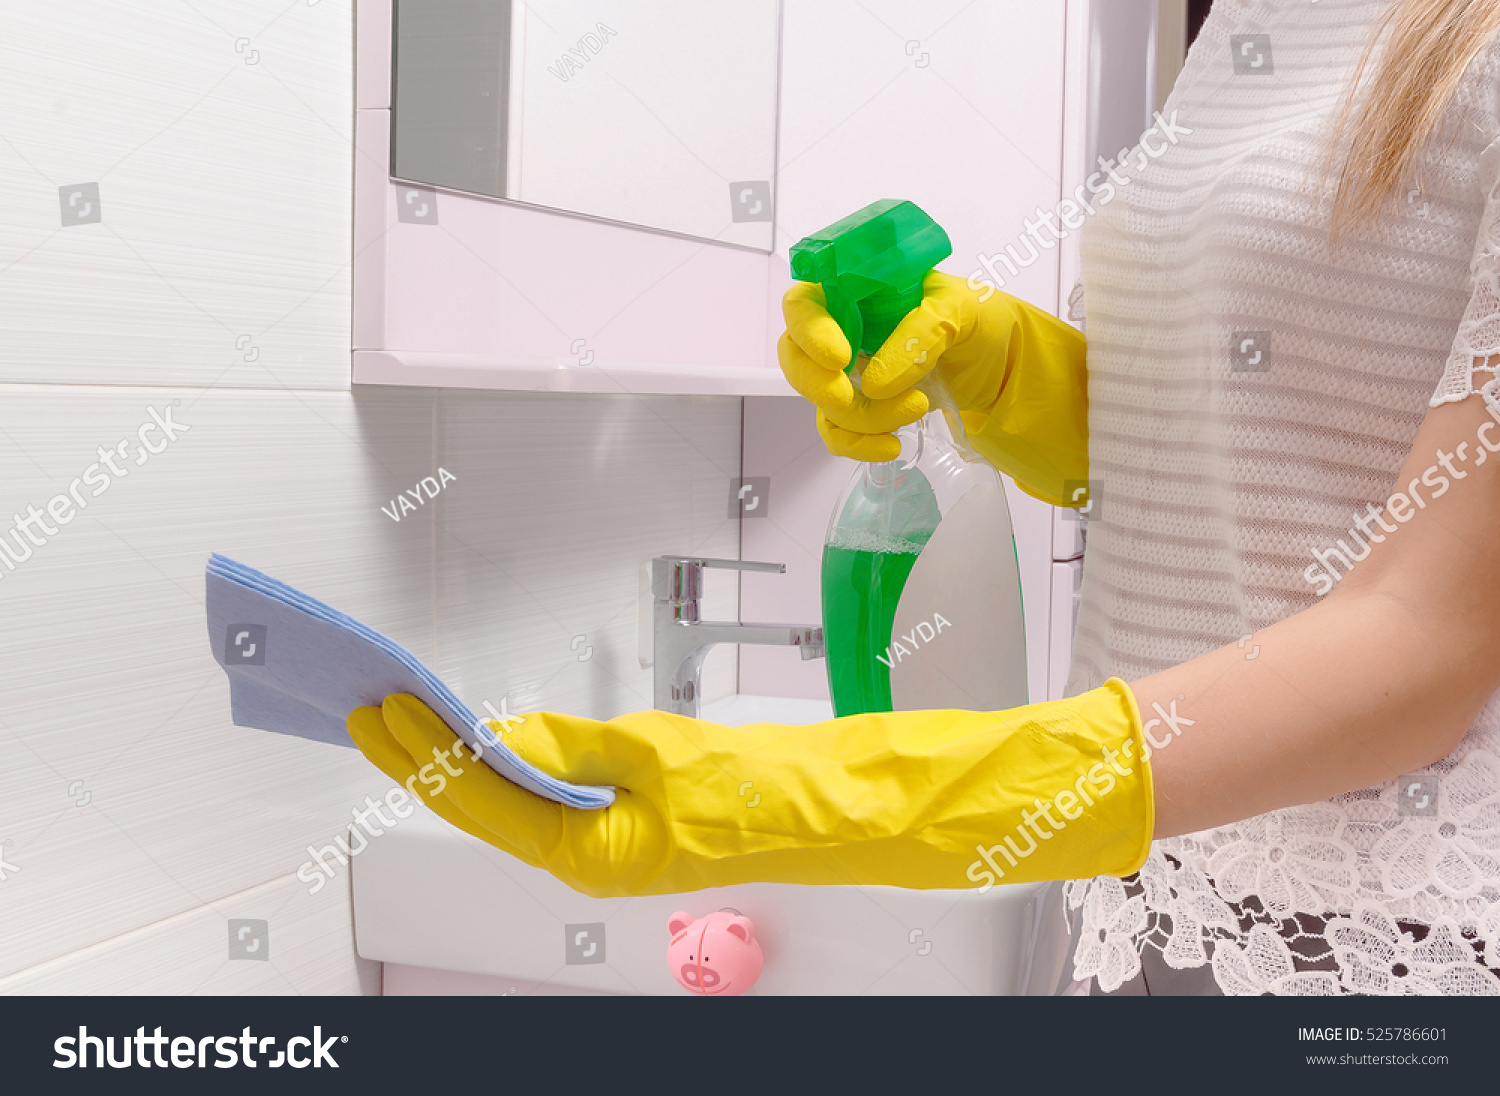 Cleanness in every move. Woman cleans mirror with help of green cloth and special mean of cleaning #525786601